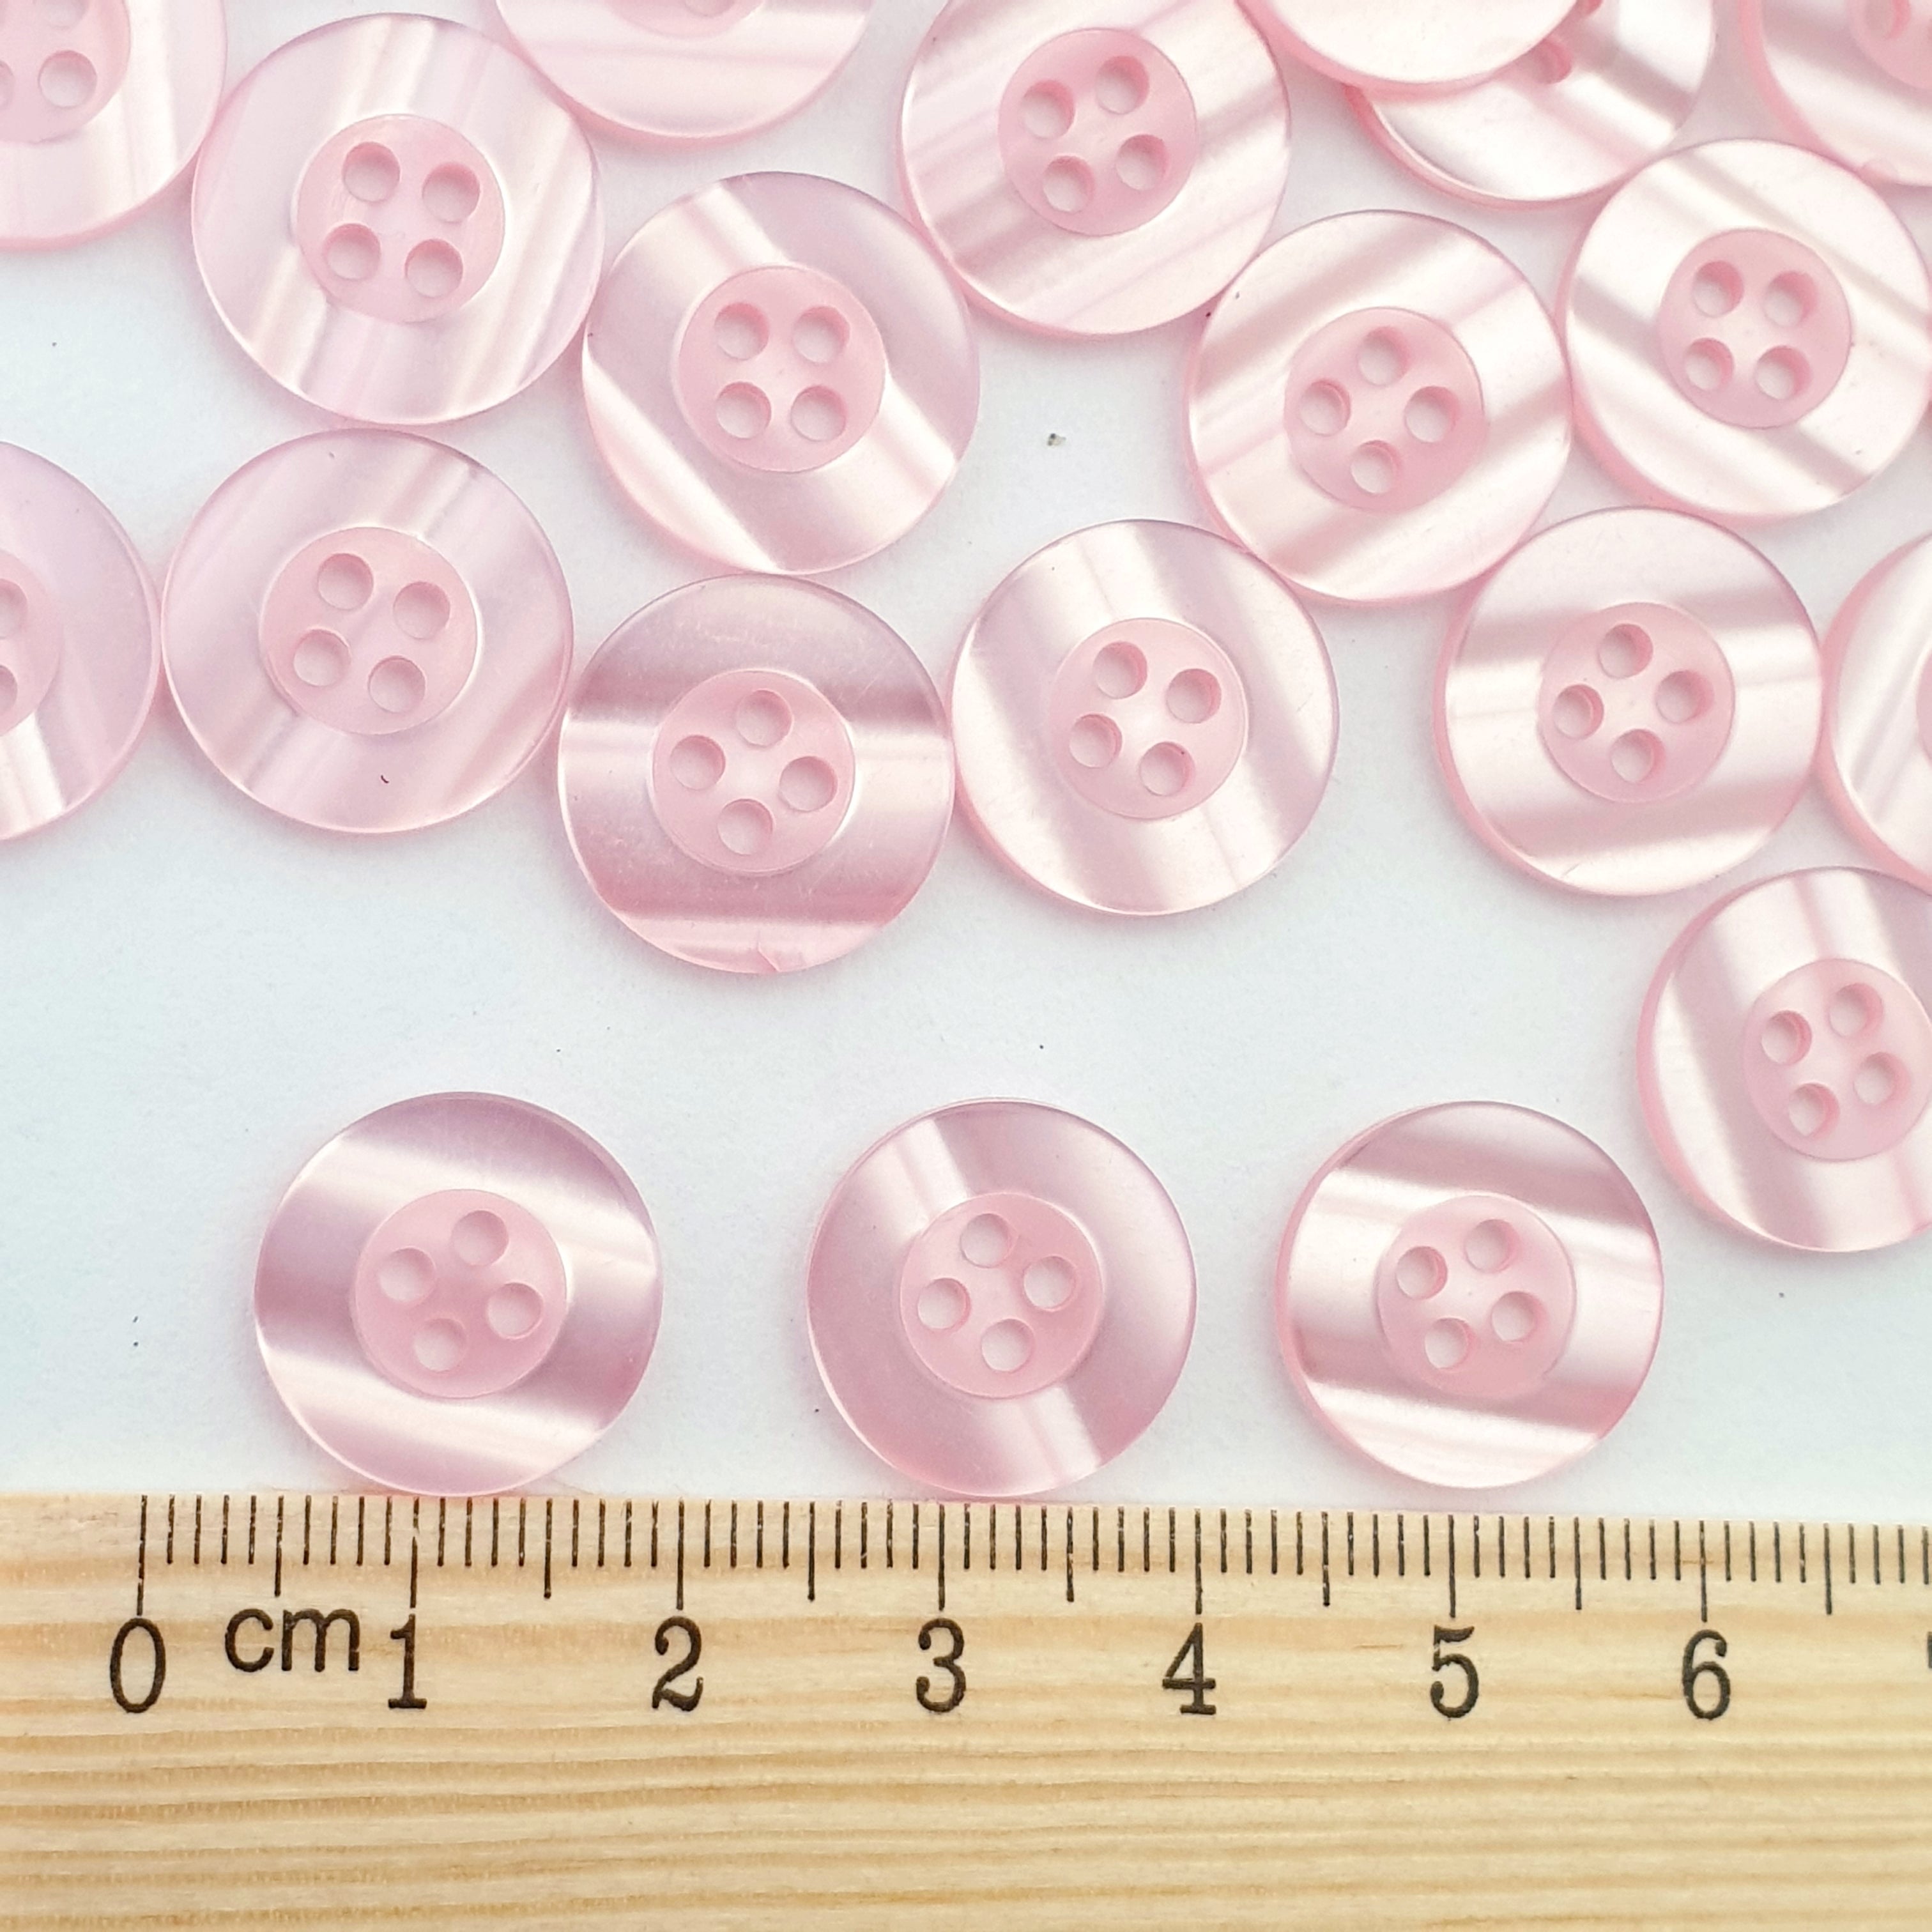 MajorCrafts 50pcs 15mm Baby Pink Pearlescent 4 Holes Round Resin Sewing Buttons